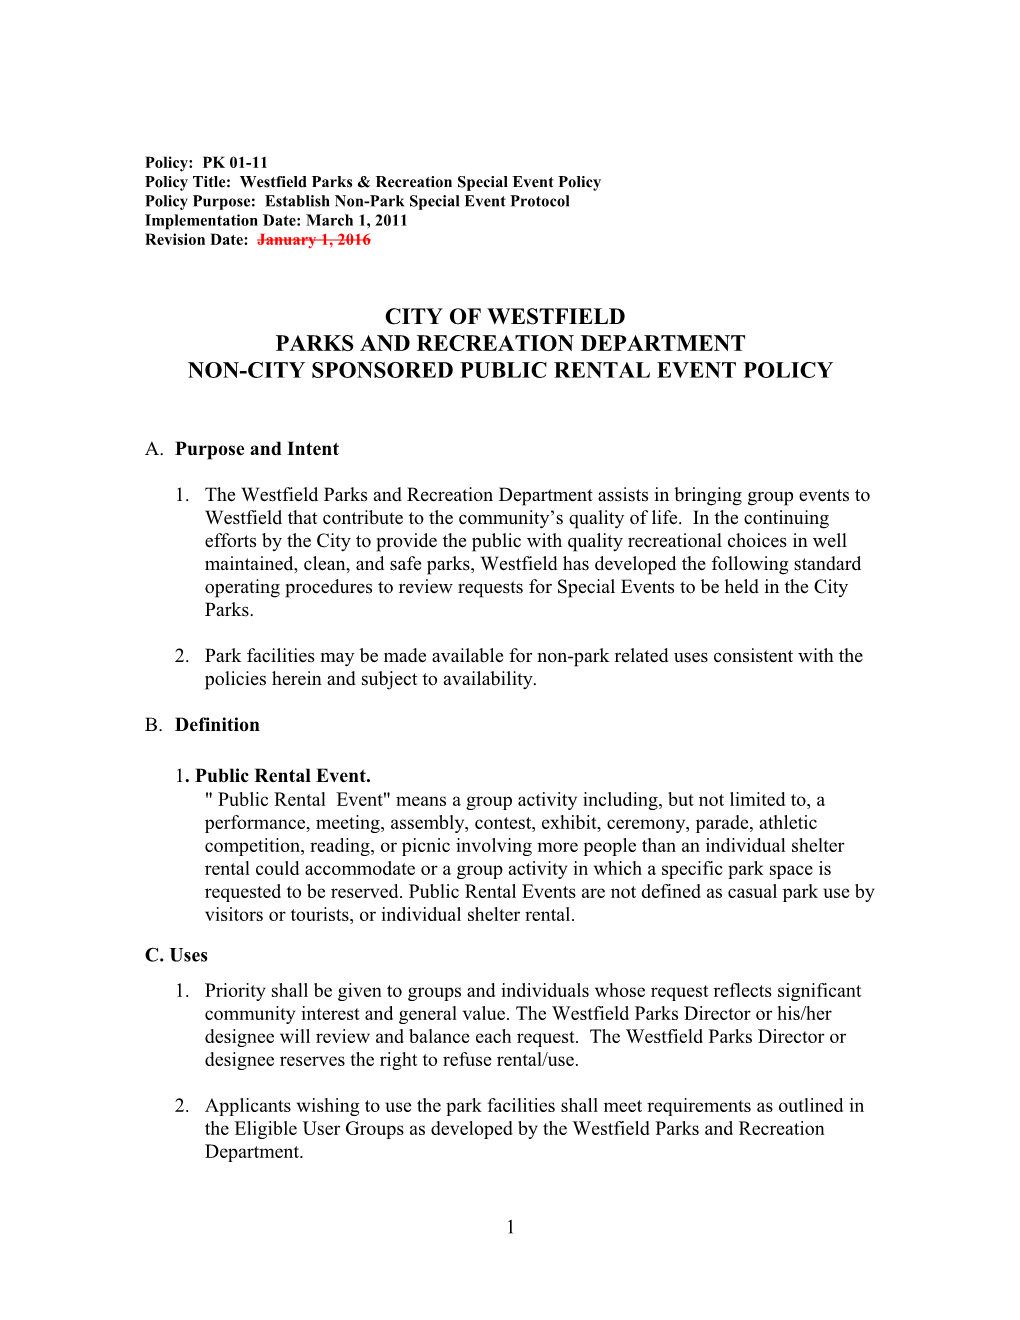 Policy Title: Westfield Parks & Recreation Special Event Policy